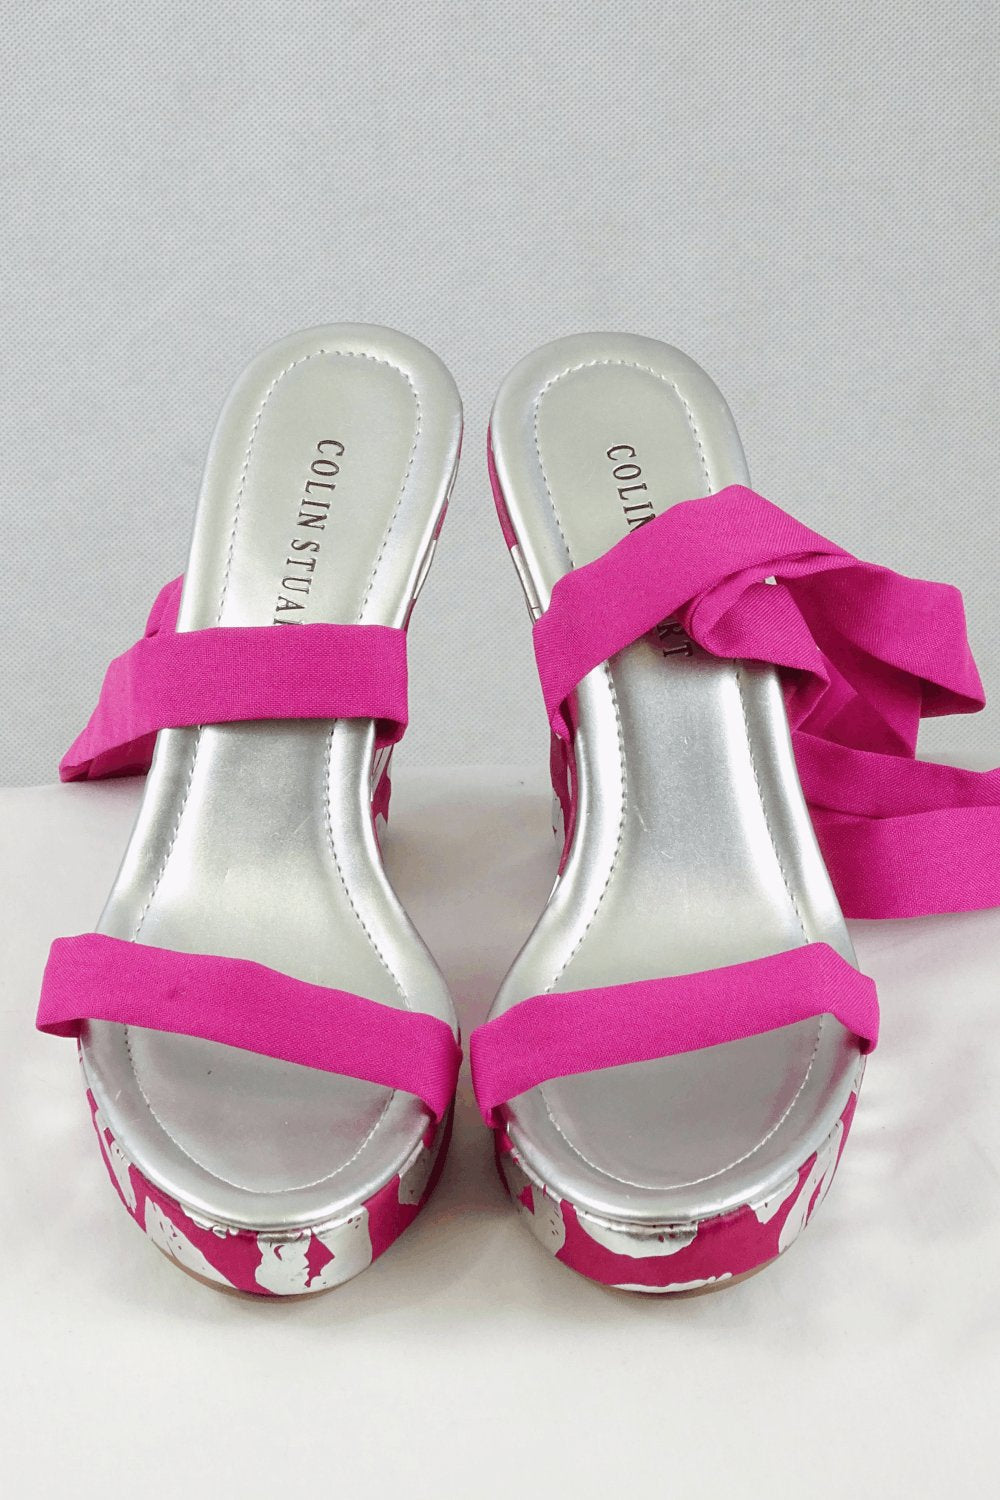 Colin Stuart Silver And Pink Wedges 6.5